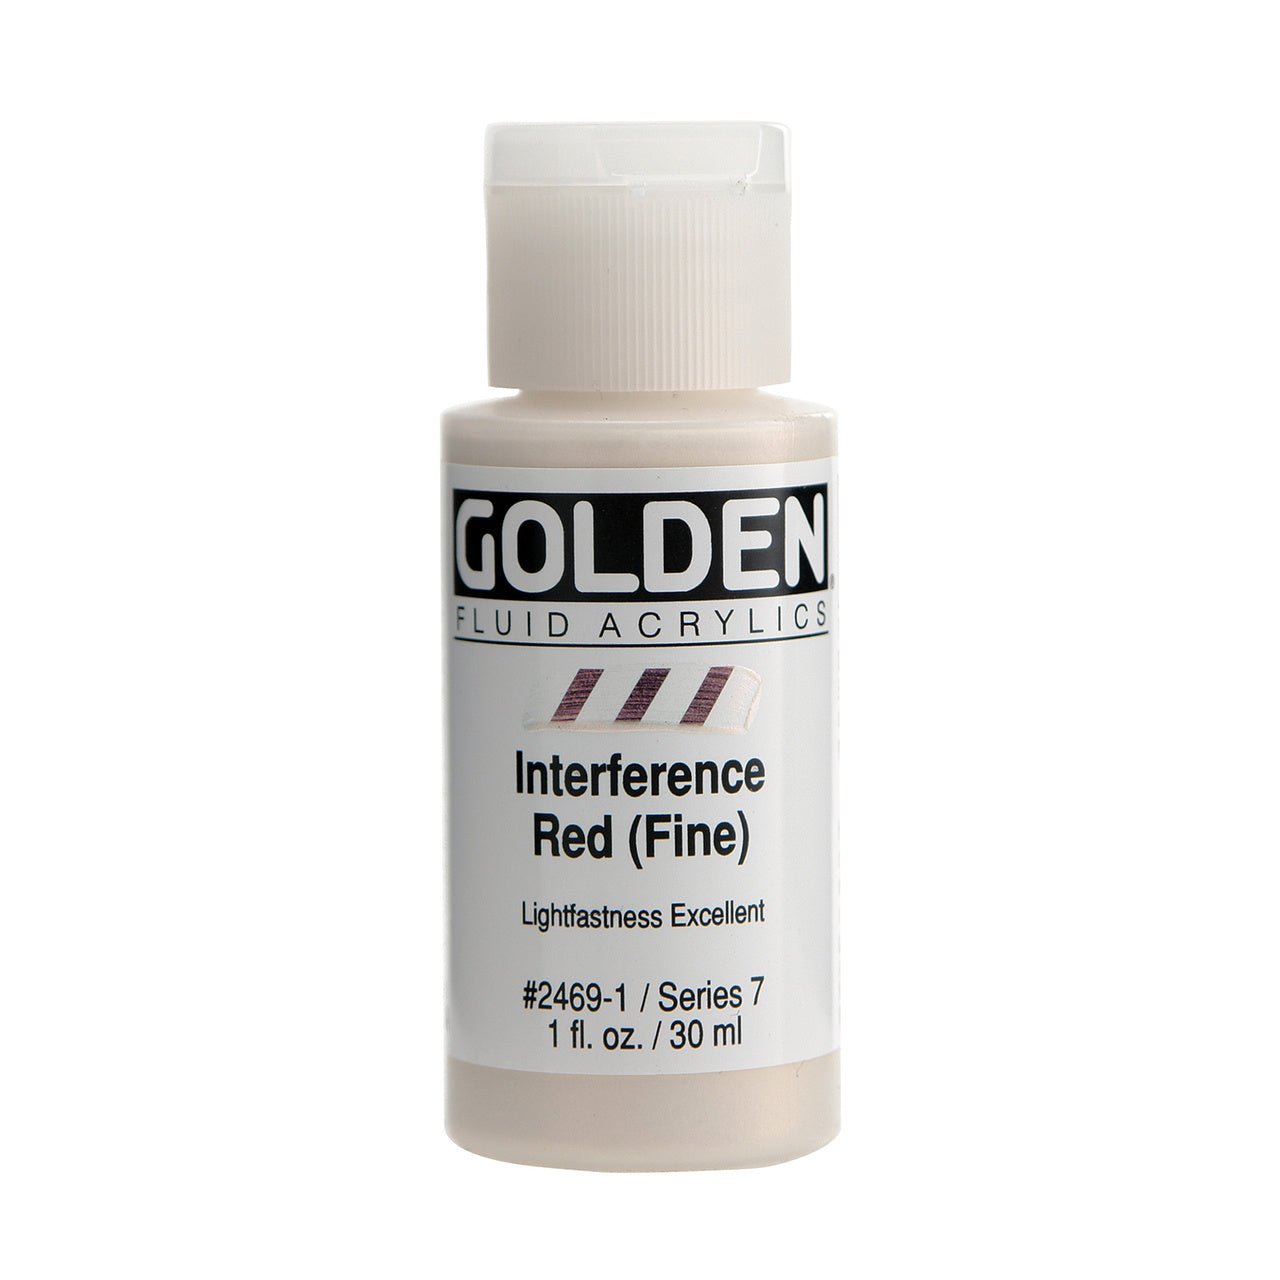 Golden Fluid Acrylic Interference Red (fine) 1 oz - merriartist.com